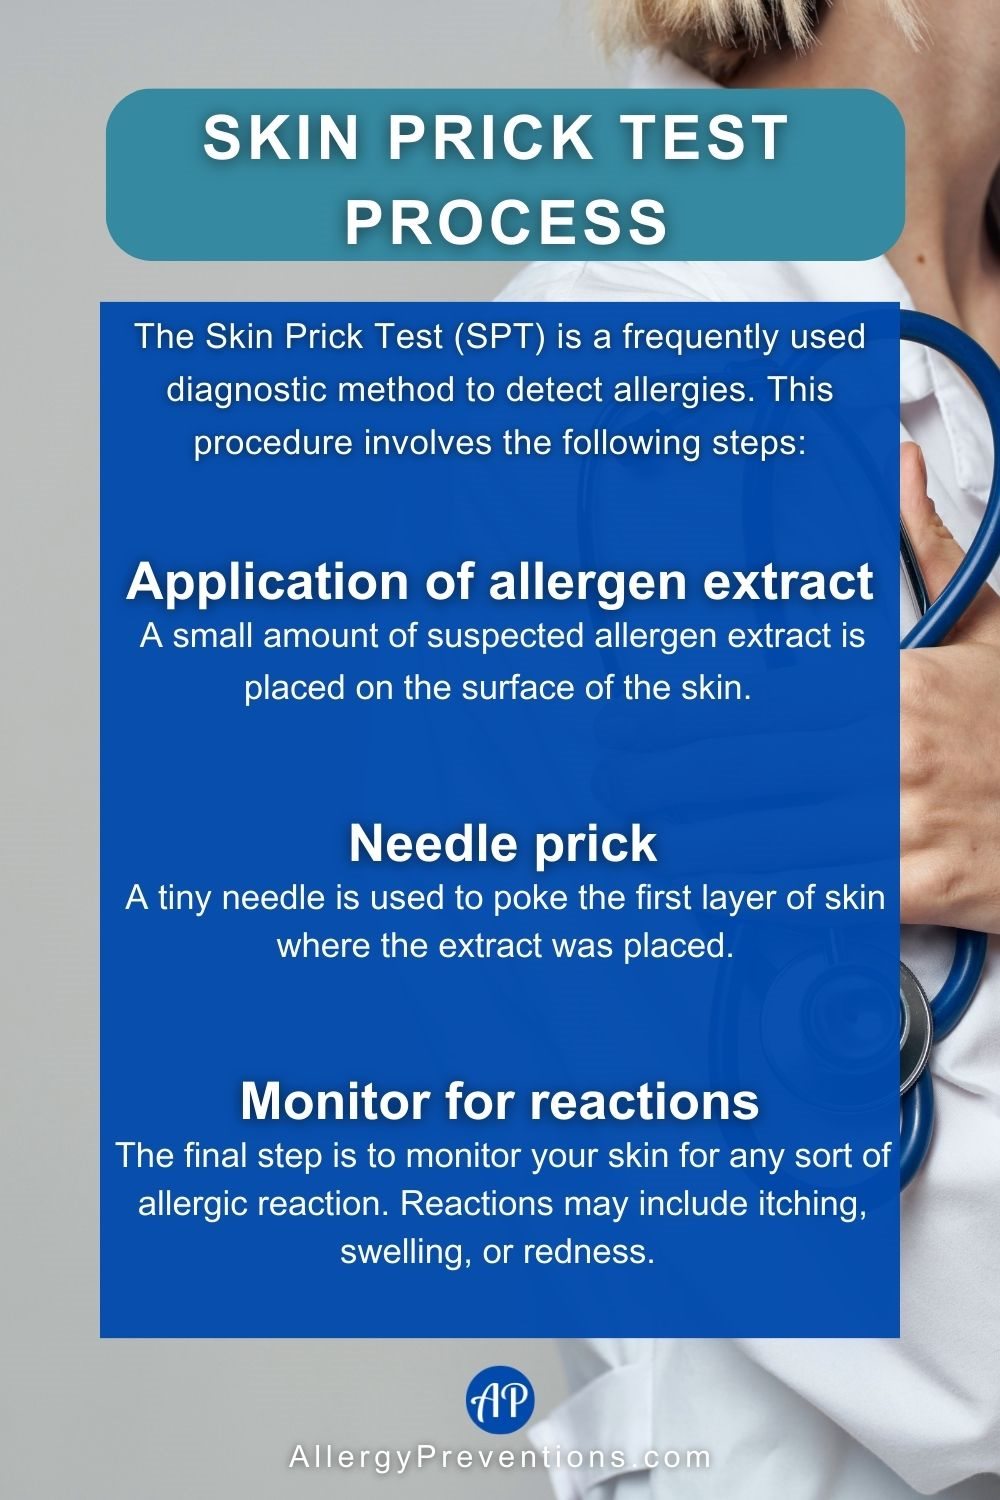 Skin Prick Test Process Infographic. The skin prick test (SPT) is a frequently used diagnostic method to detect allergies. This procedure involves the following steps: Application of allergen extract, a small amount of suspected allergen extract is placed on the surface of the skin. Need Prick, a tiny needle is used to poke the first later of skin where the extract was placed. Monitor for reactions, the final step is to monitor your skin for any sort of allergic reaction. Reactions may include itching, swelling, or redness.